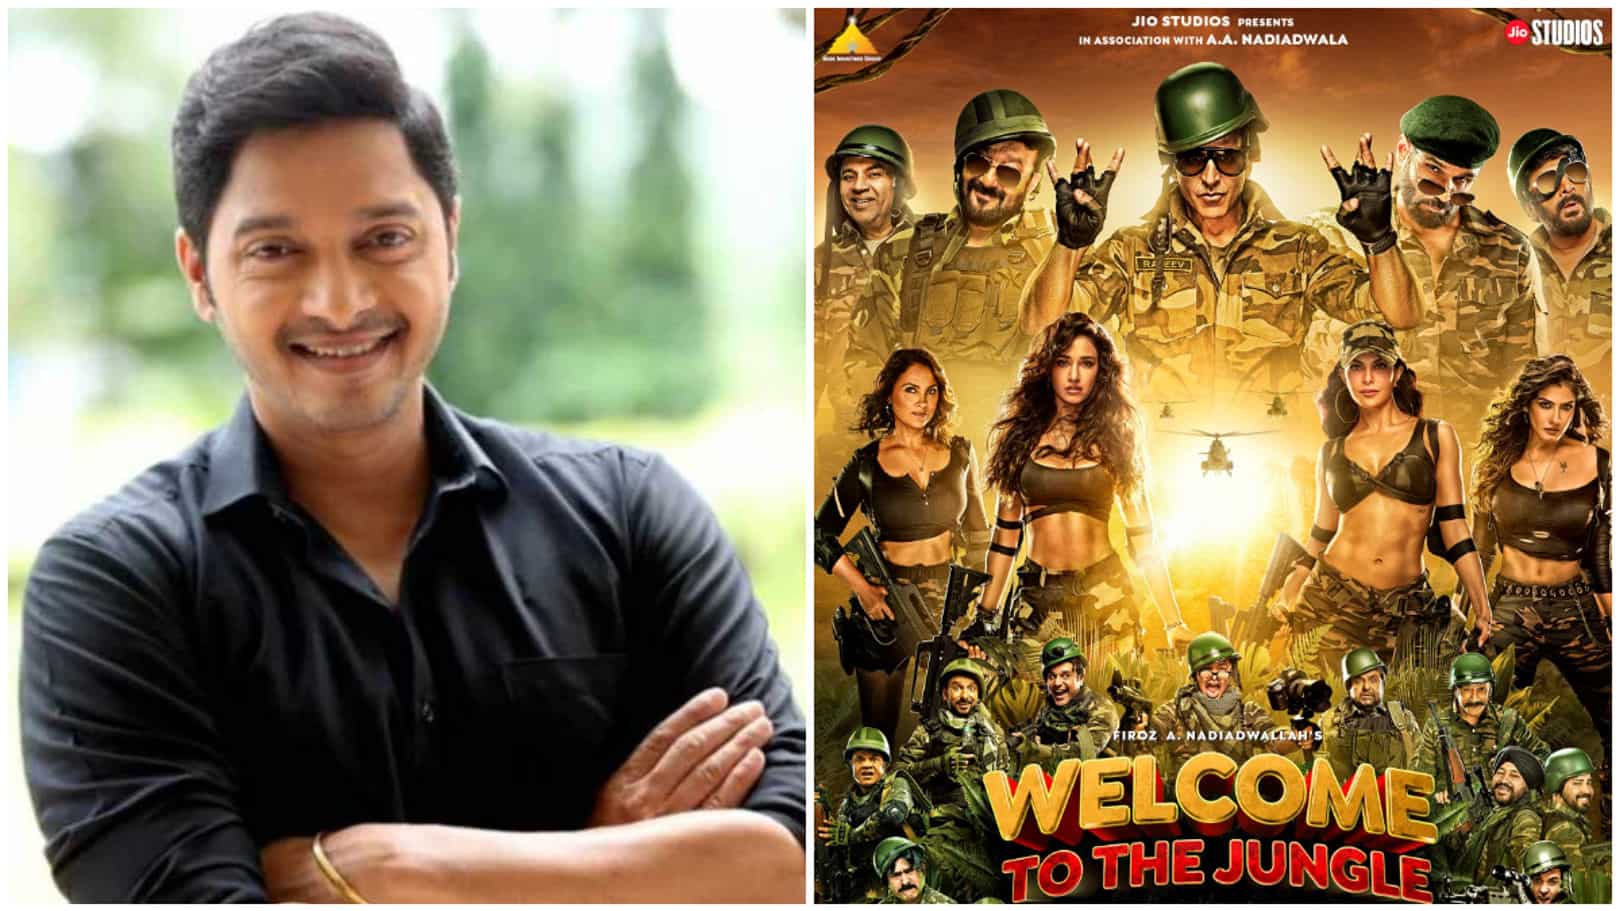 https://www.mobilemasala.com/film-gossip/Shreyas-Talpade-feels-there-are-some-crazy-scenes-in-Akshay-Kumar-starrer-Welcome-to-the-Jungle---Details-here-i221122